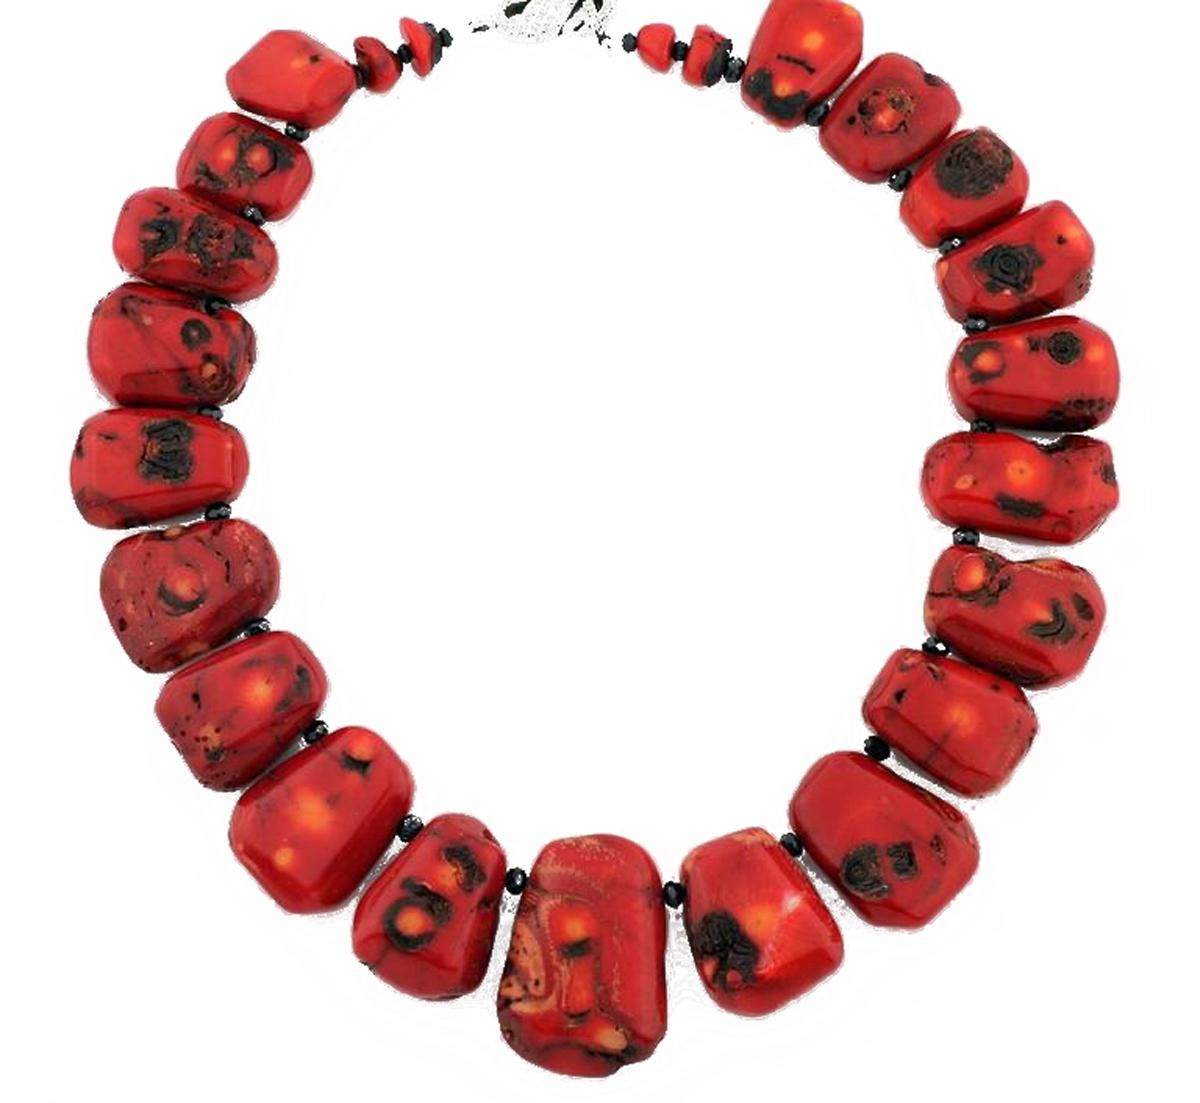 Extraordinary unique very rare graduated gem polished red and red/orangy natural Coral necklace enhanced with black Spinel accents compose this handmade necklace.  This facinating necklace is 19.5 inches in length and the largest coral is 43mm x